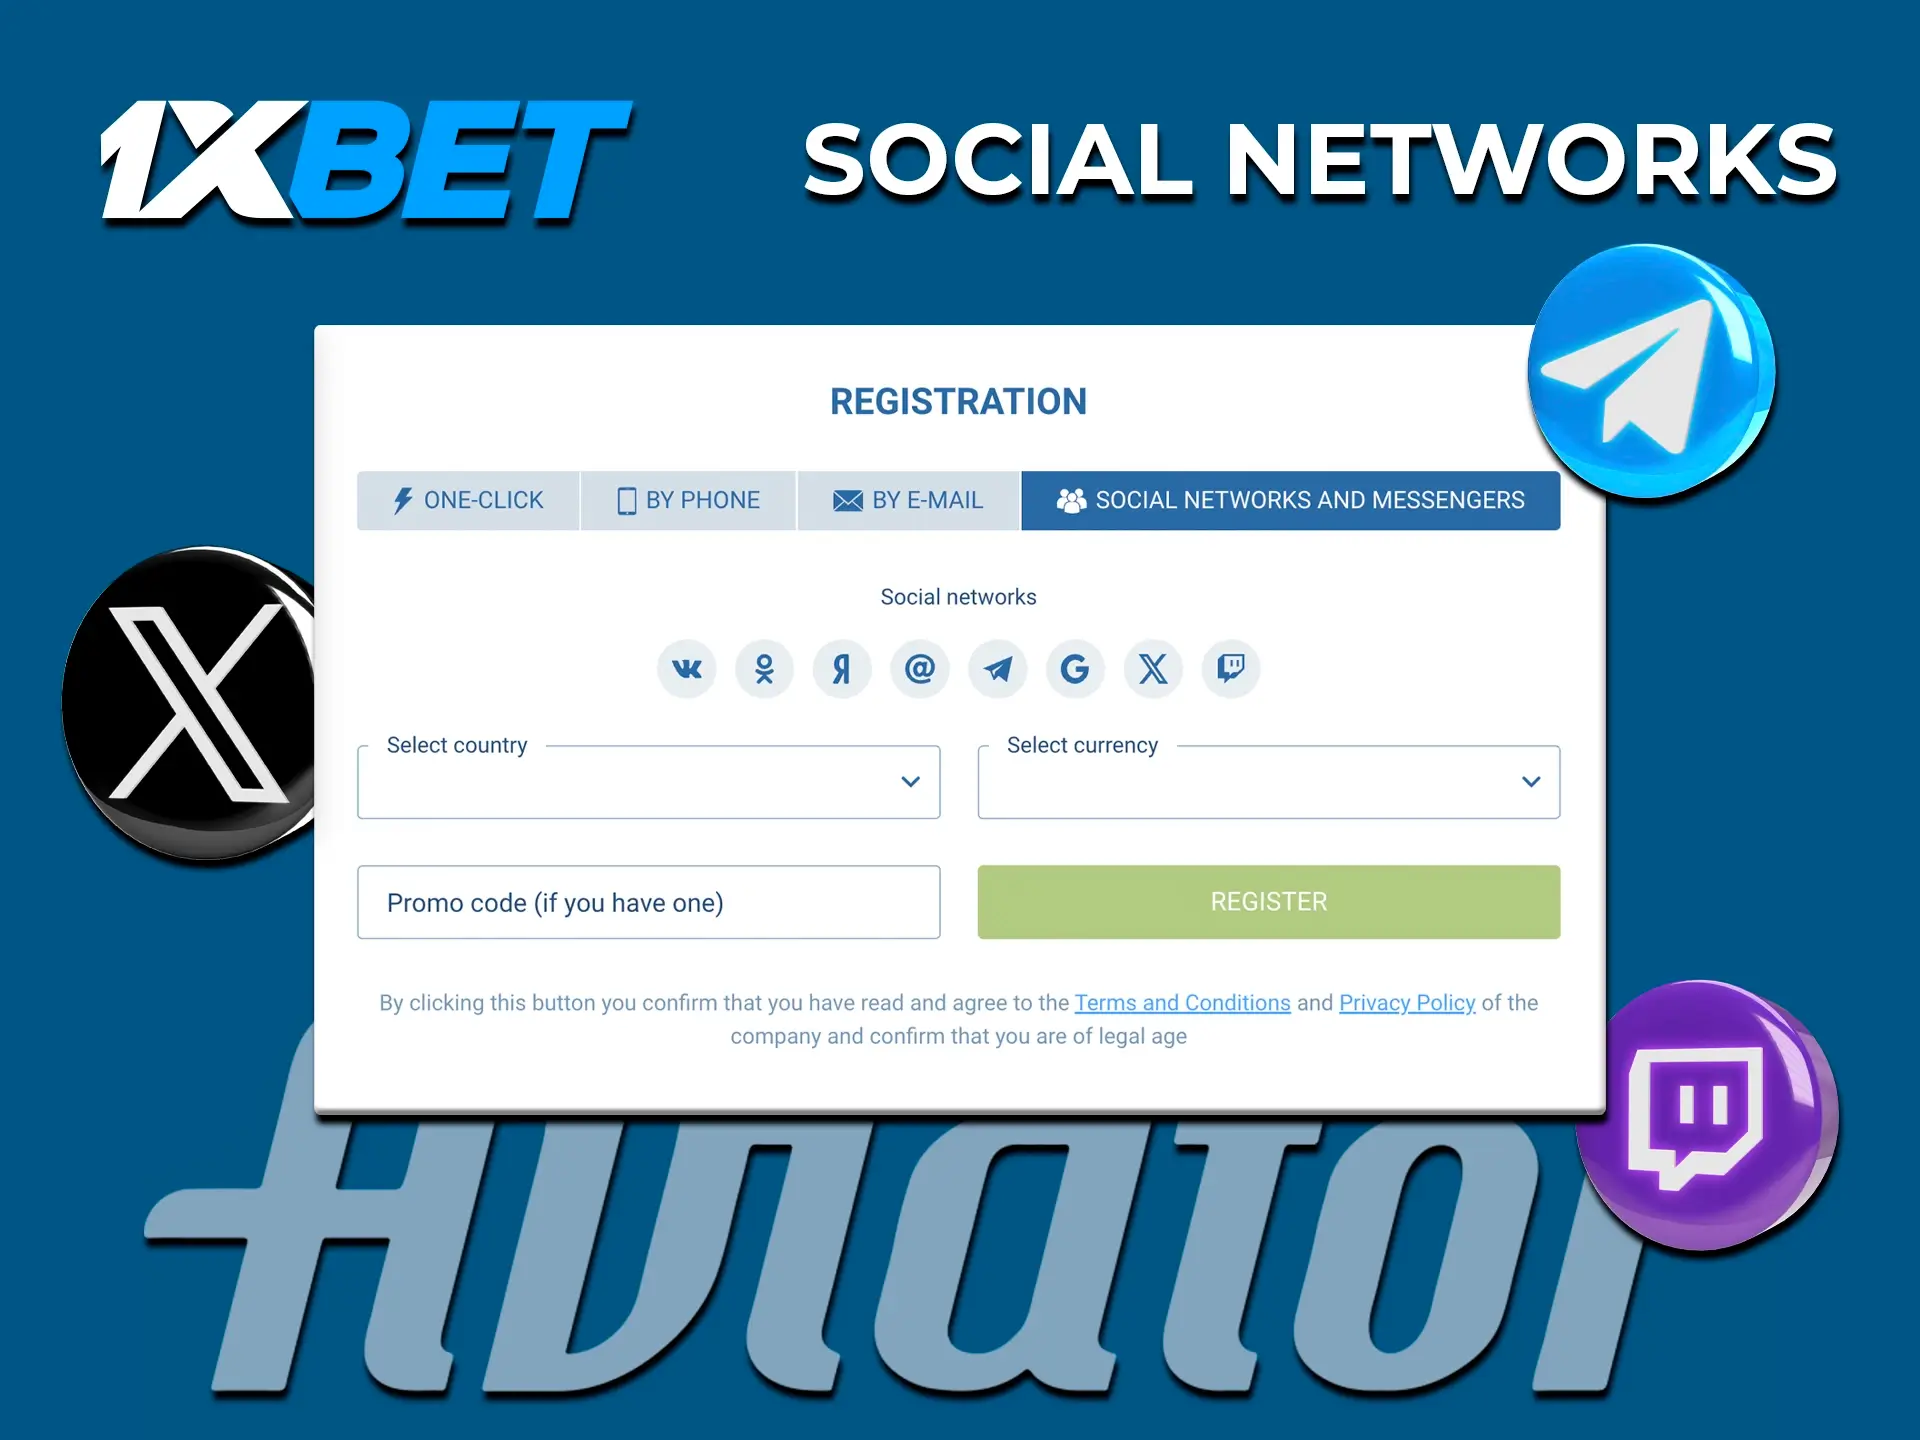 By using the social media registration method you immediately give yourself full access to the 1xBet website and the Aviator game.